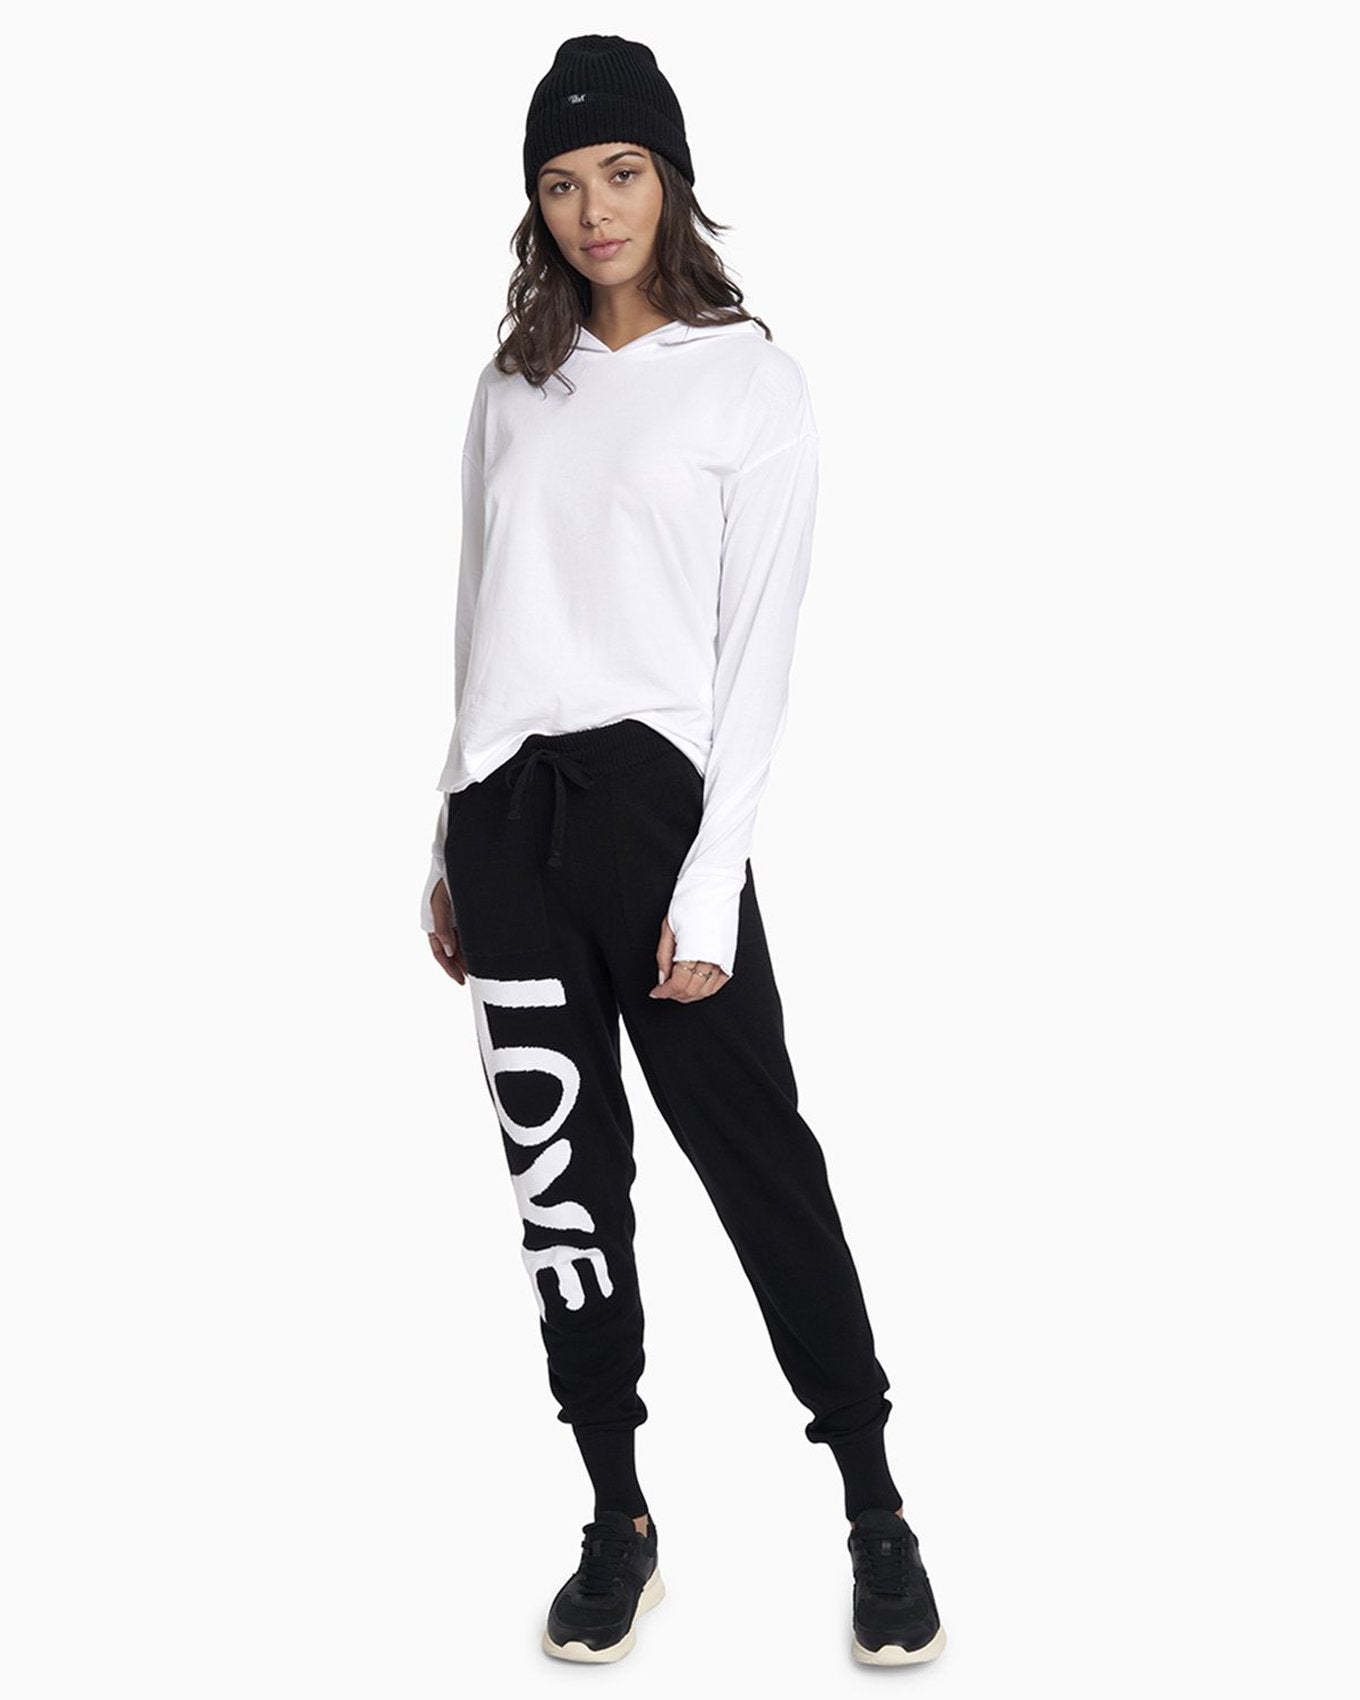 YesAnd Organic Knit Jogger Knit Jogger in color White Love on Black and shape jogger/sweatpant